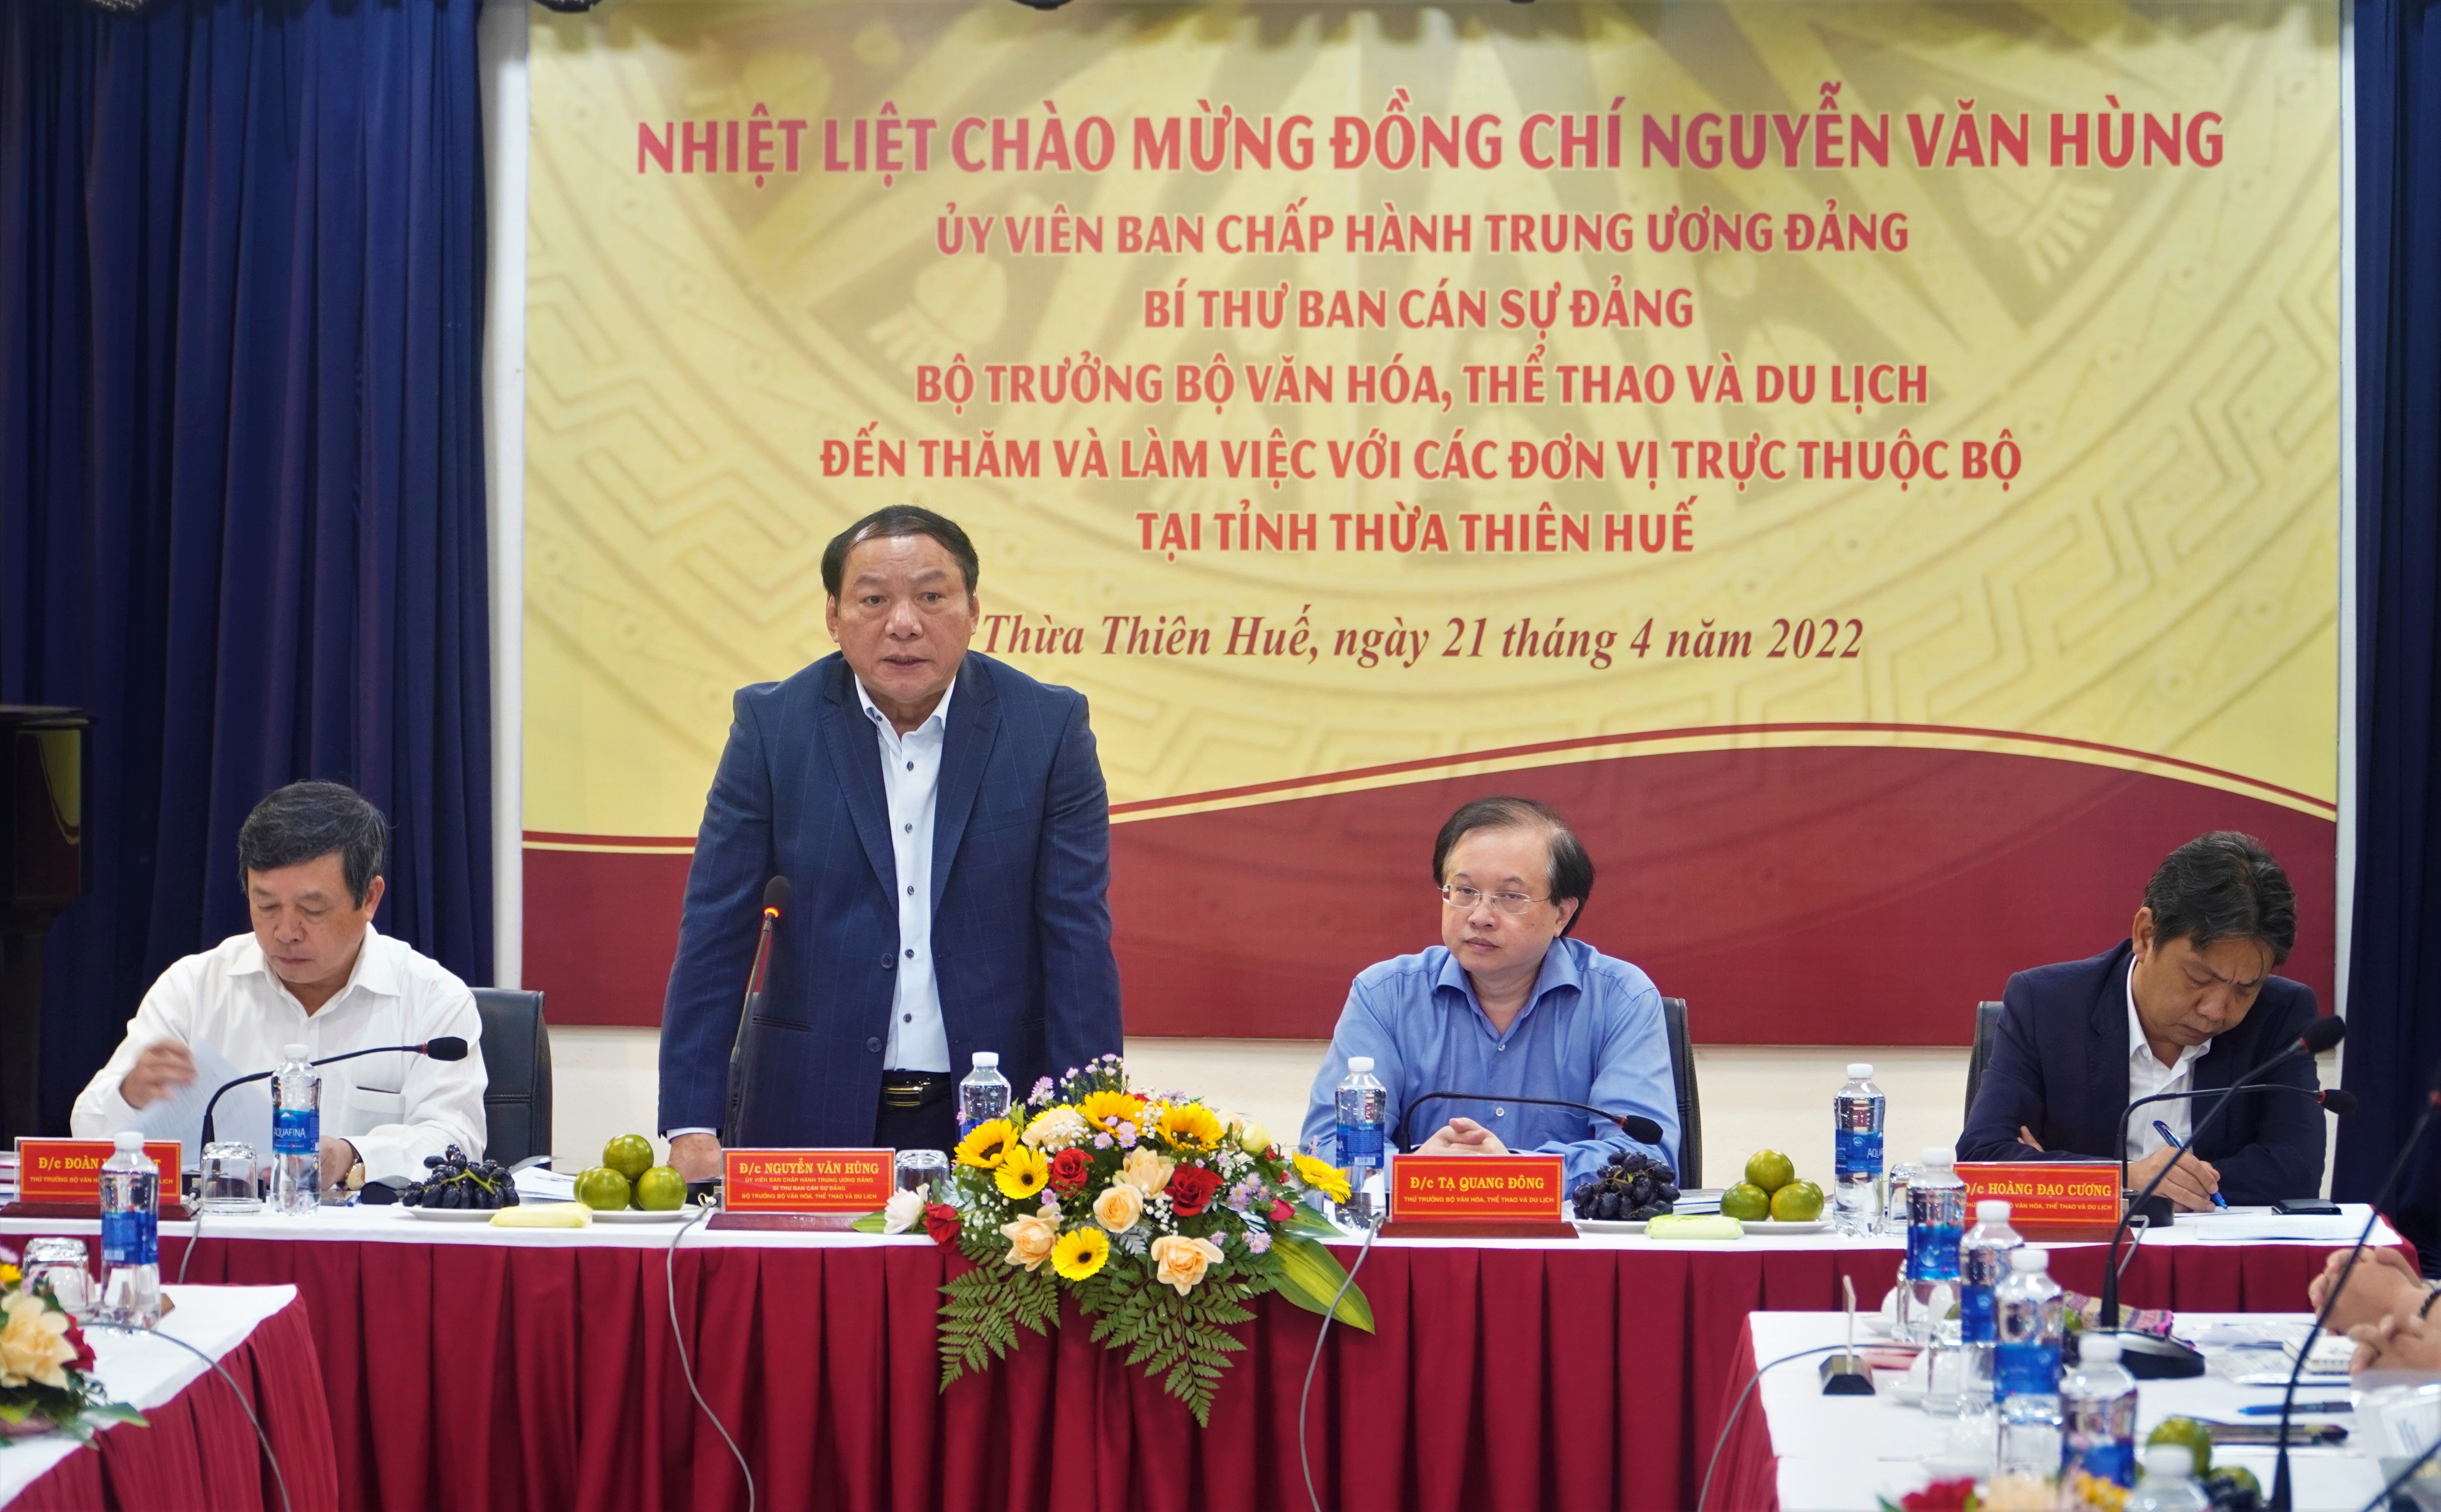 Minister of Culture, Sports and Tourism Nguyen Ngoc Thien visited and worked at the Hue Academy of Music